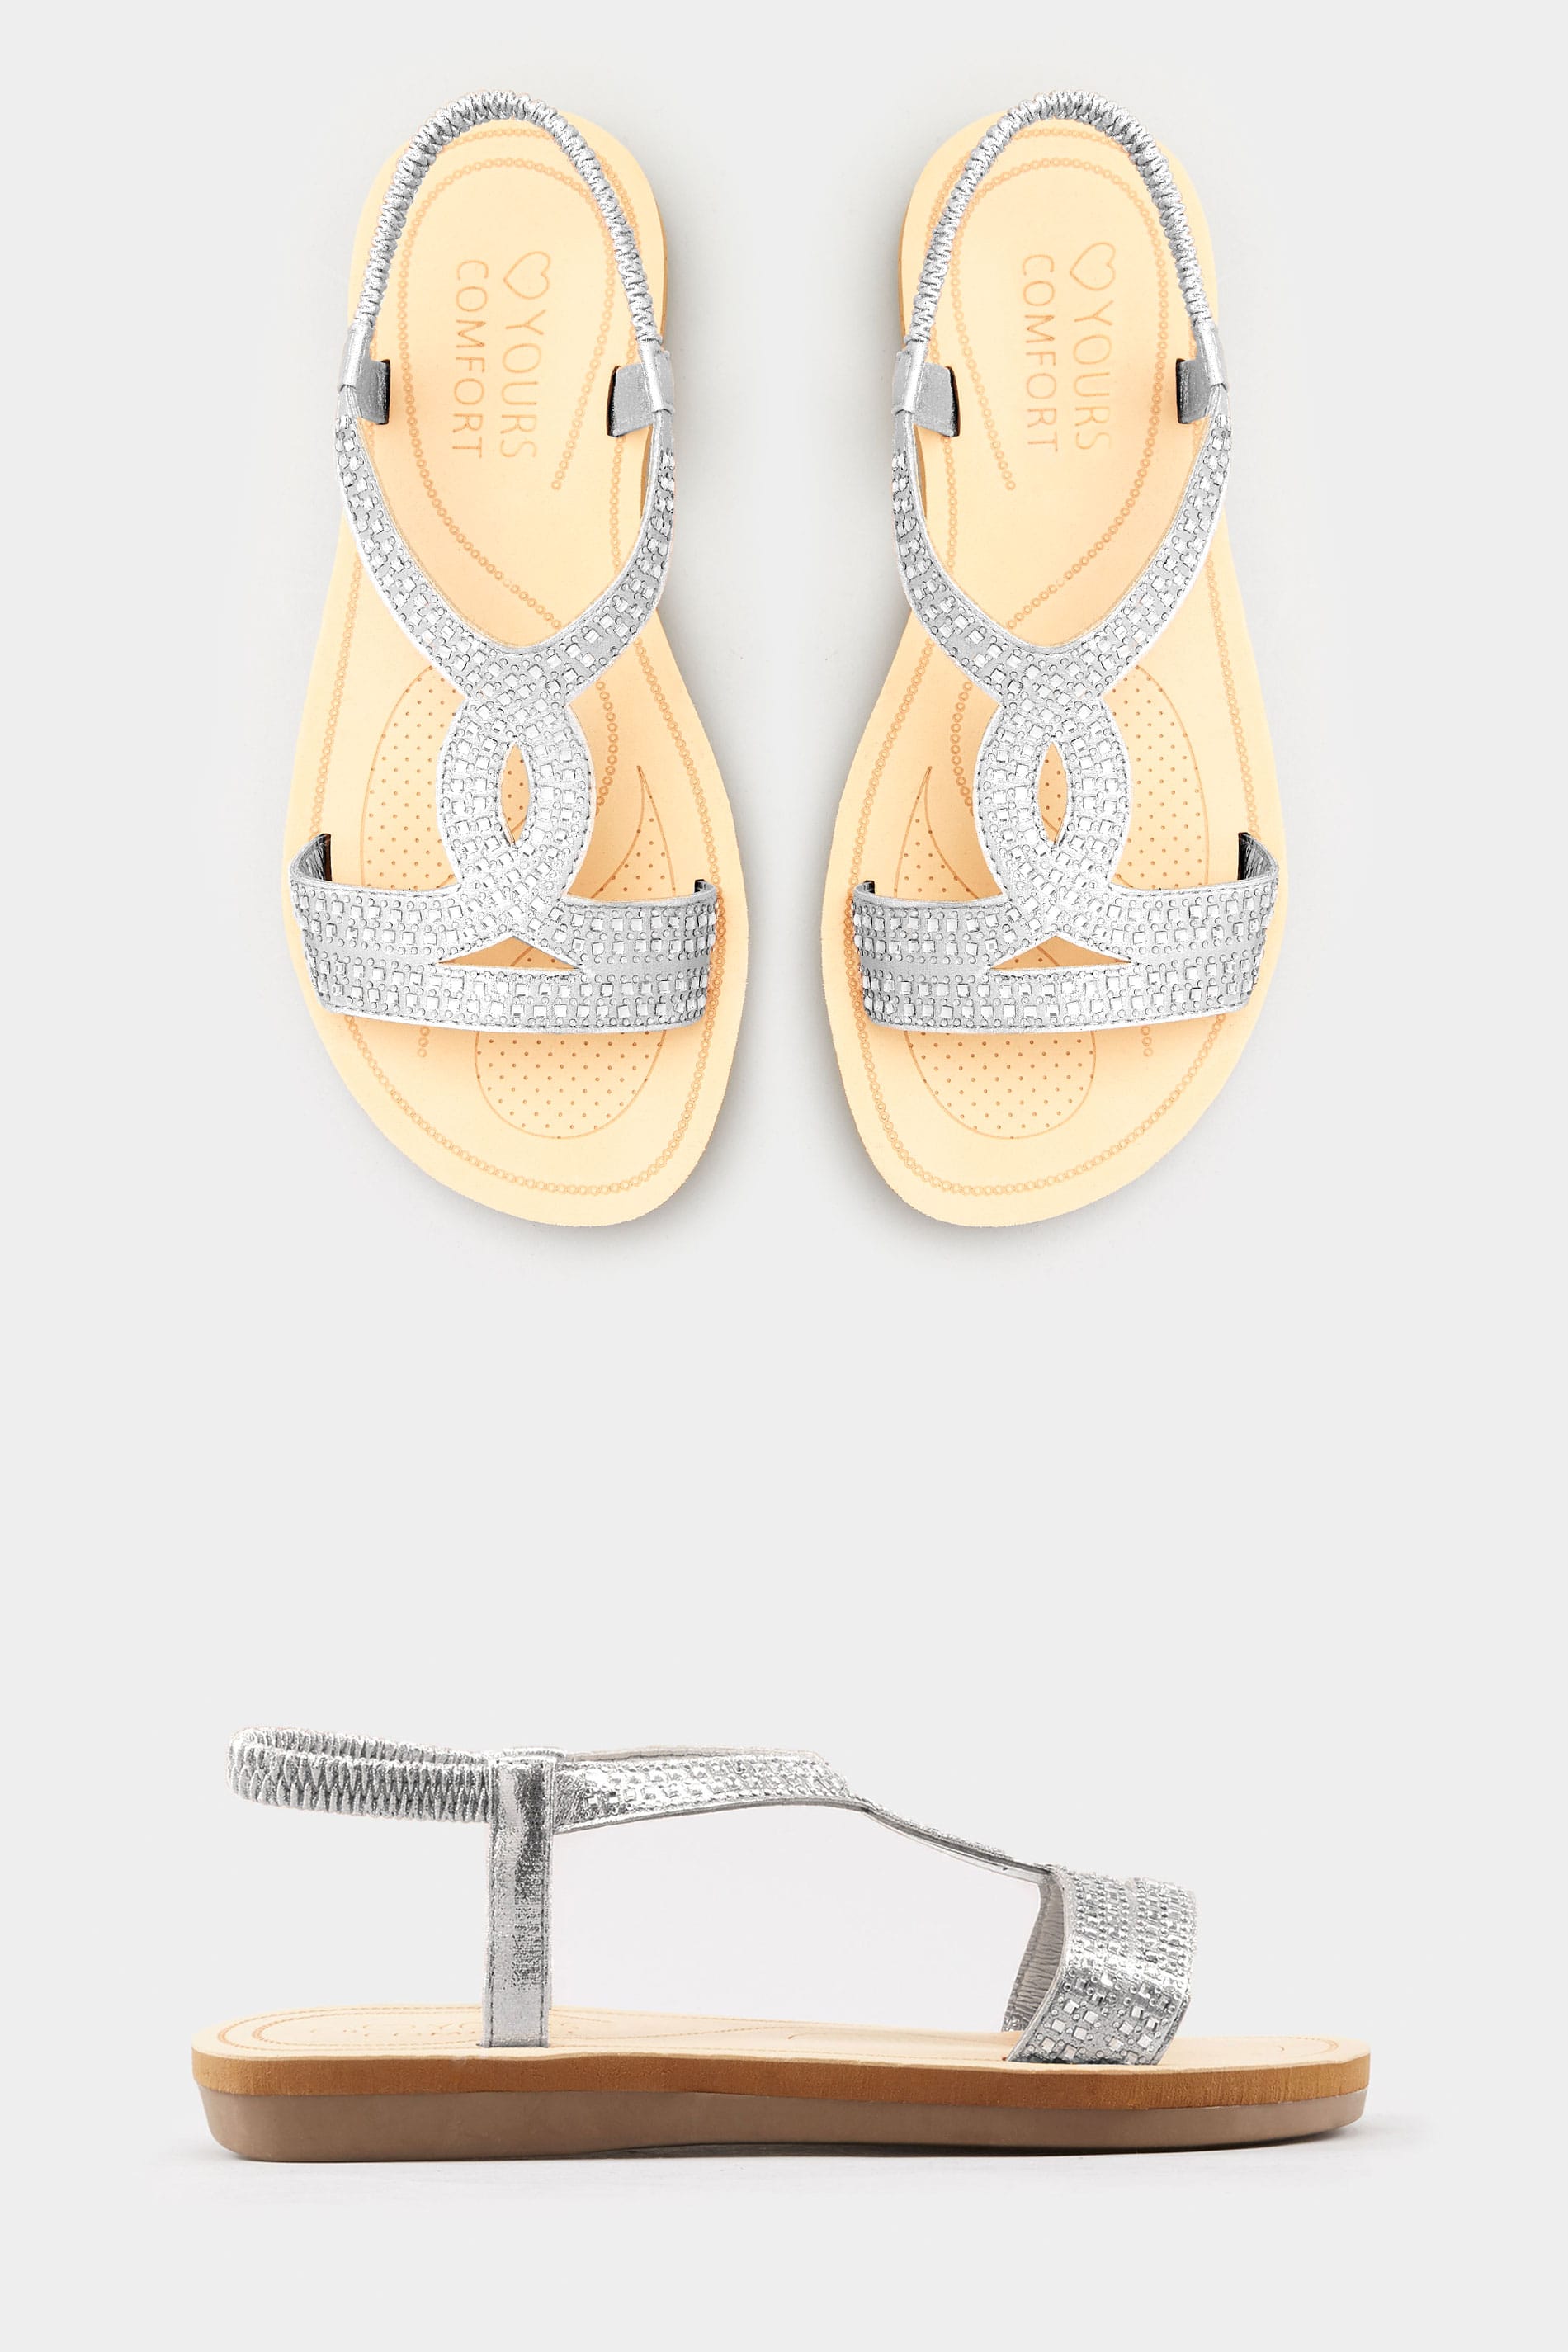 silver sandals wide fit uk